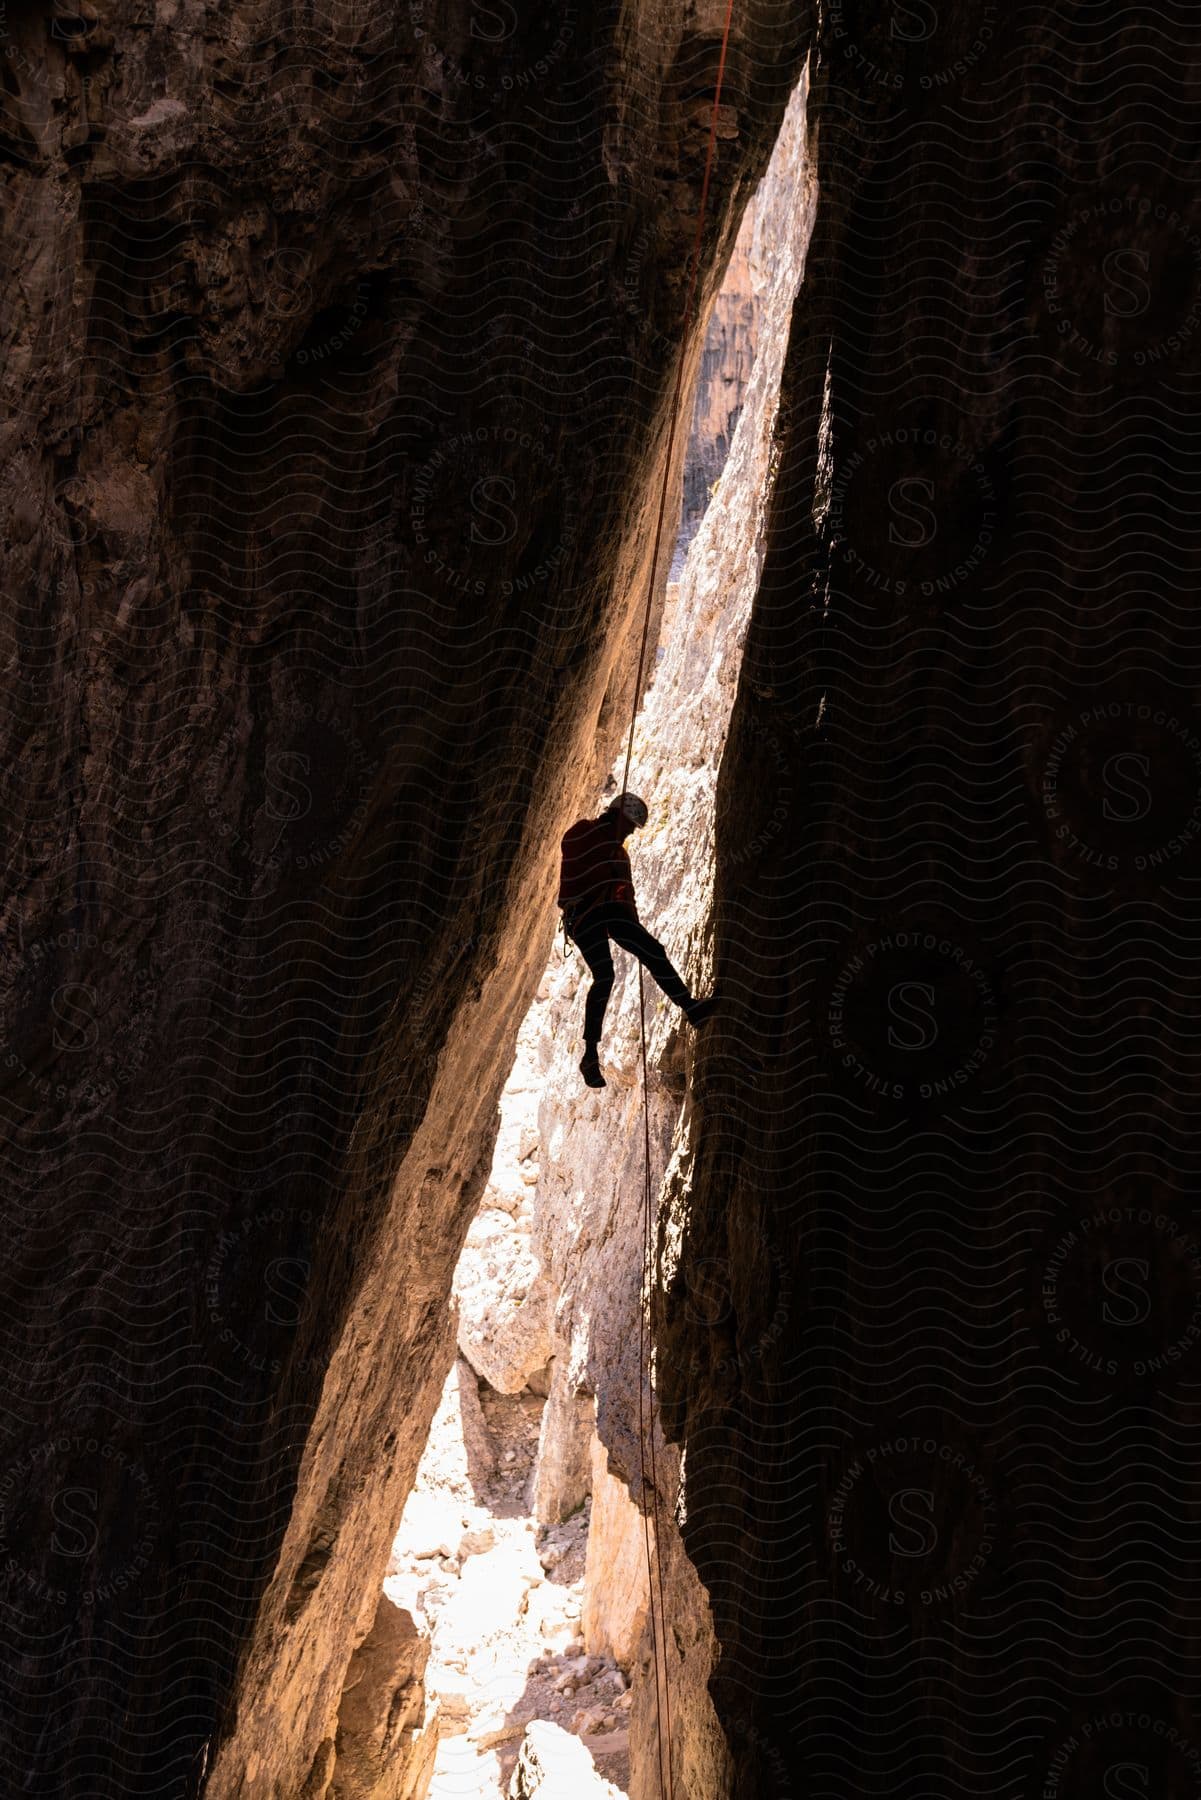 A rock climber hangs on a rope in a narrow cleft between two rock faces.